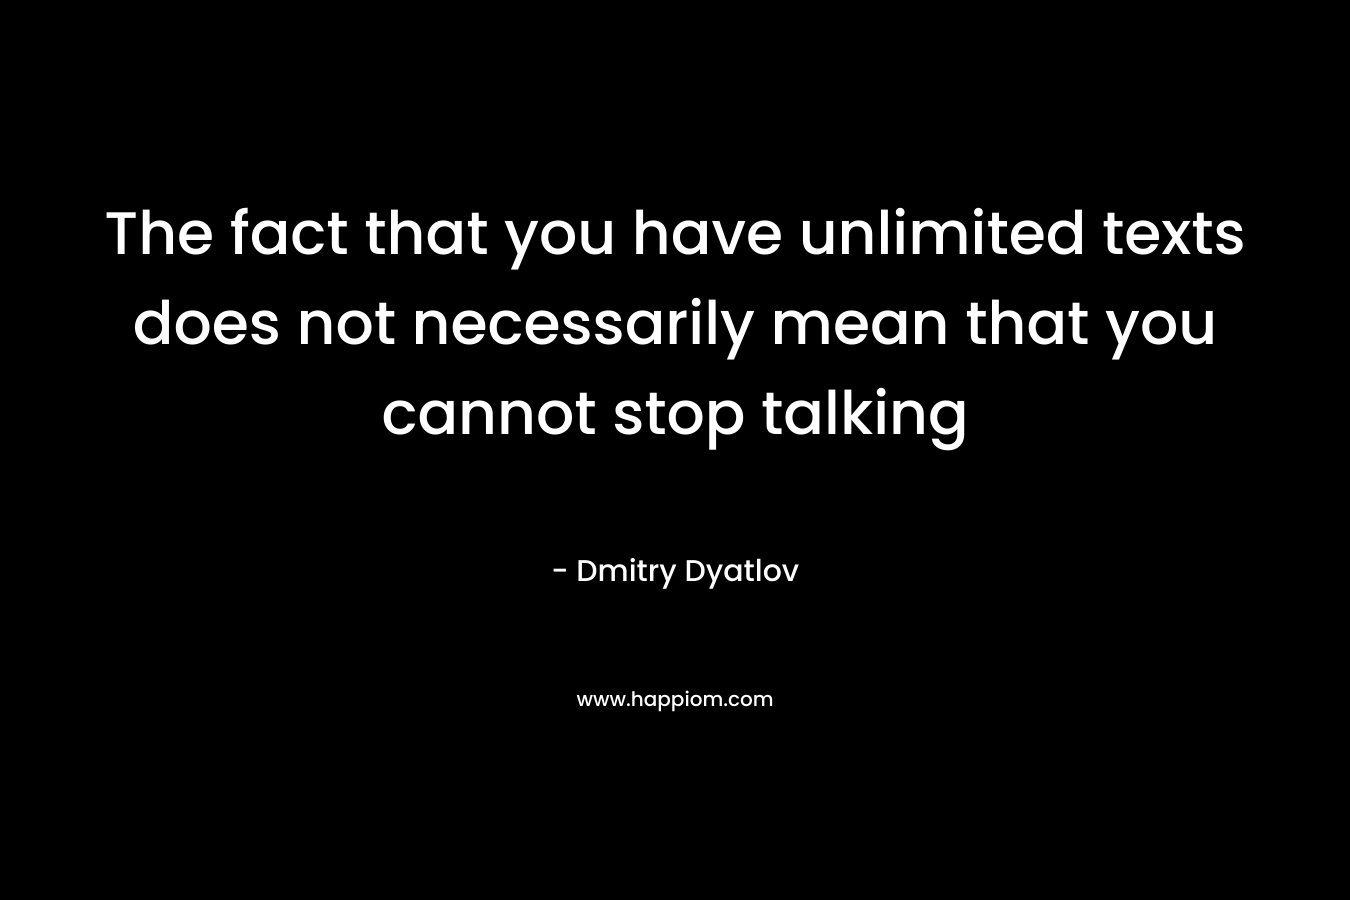 The fact that you have unlimited texts does not necessarily mean that you cannot stop talking